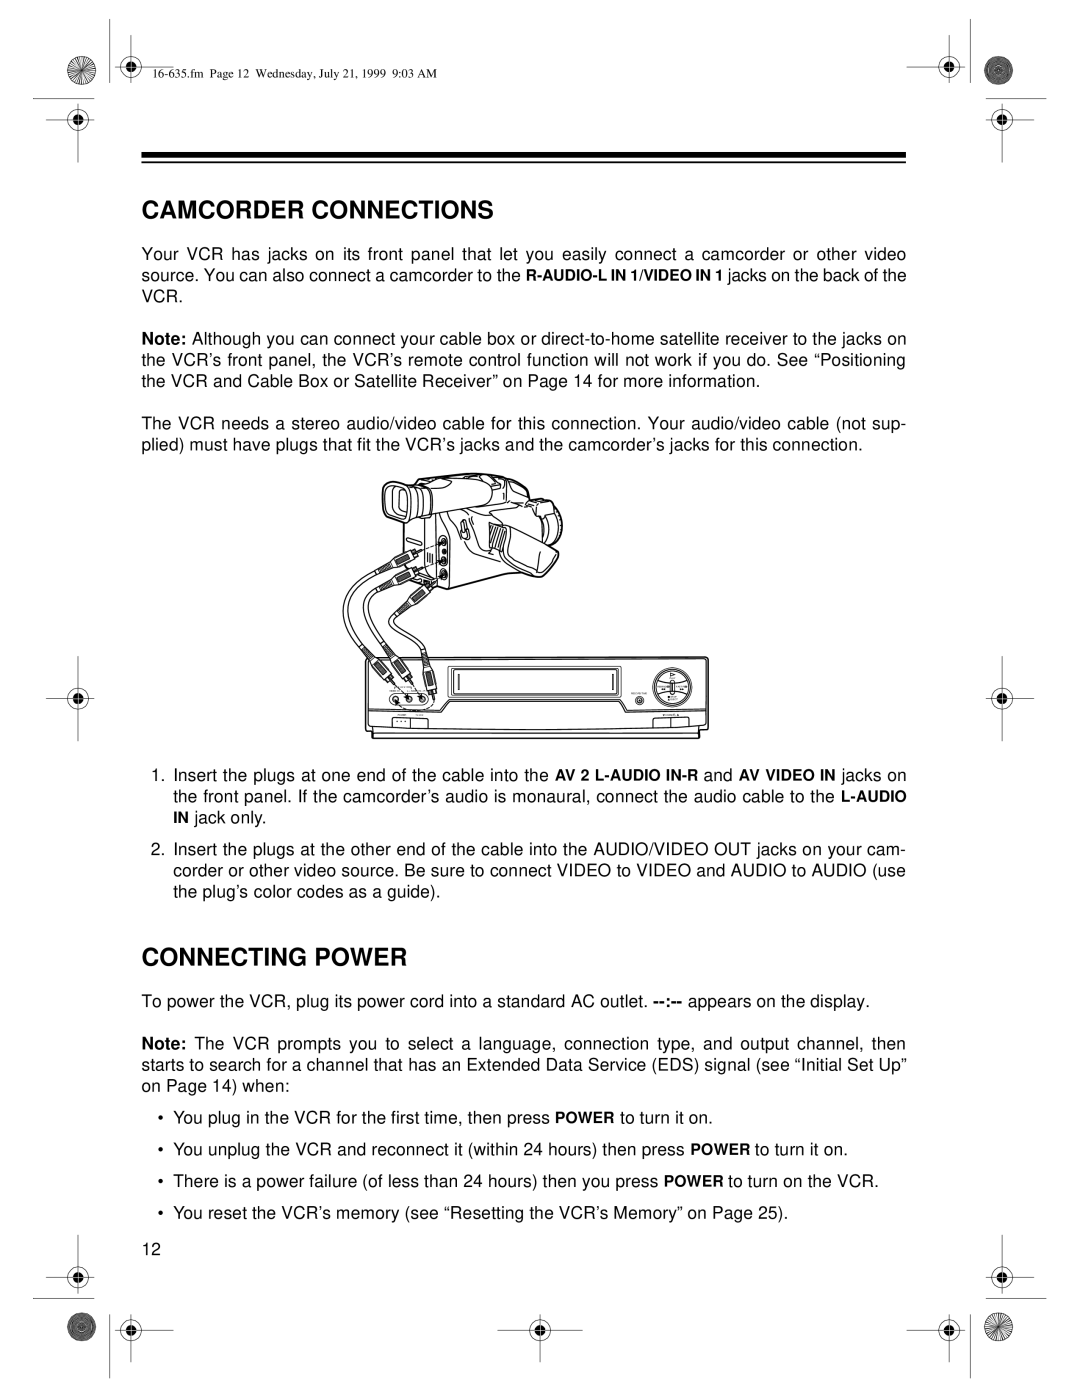 Radio Shack 66 owner manual Camcorder Connections, Connecting Power 